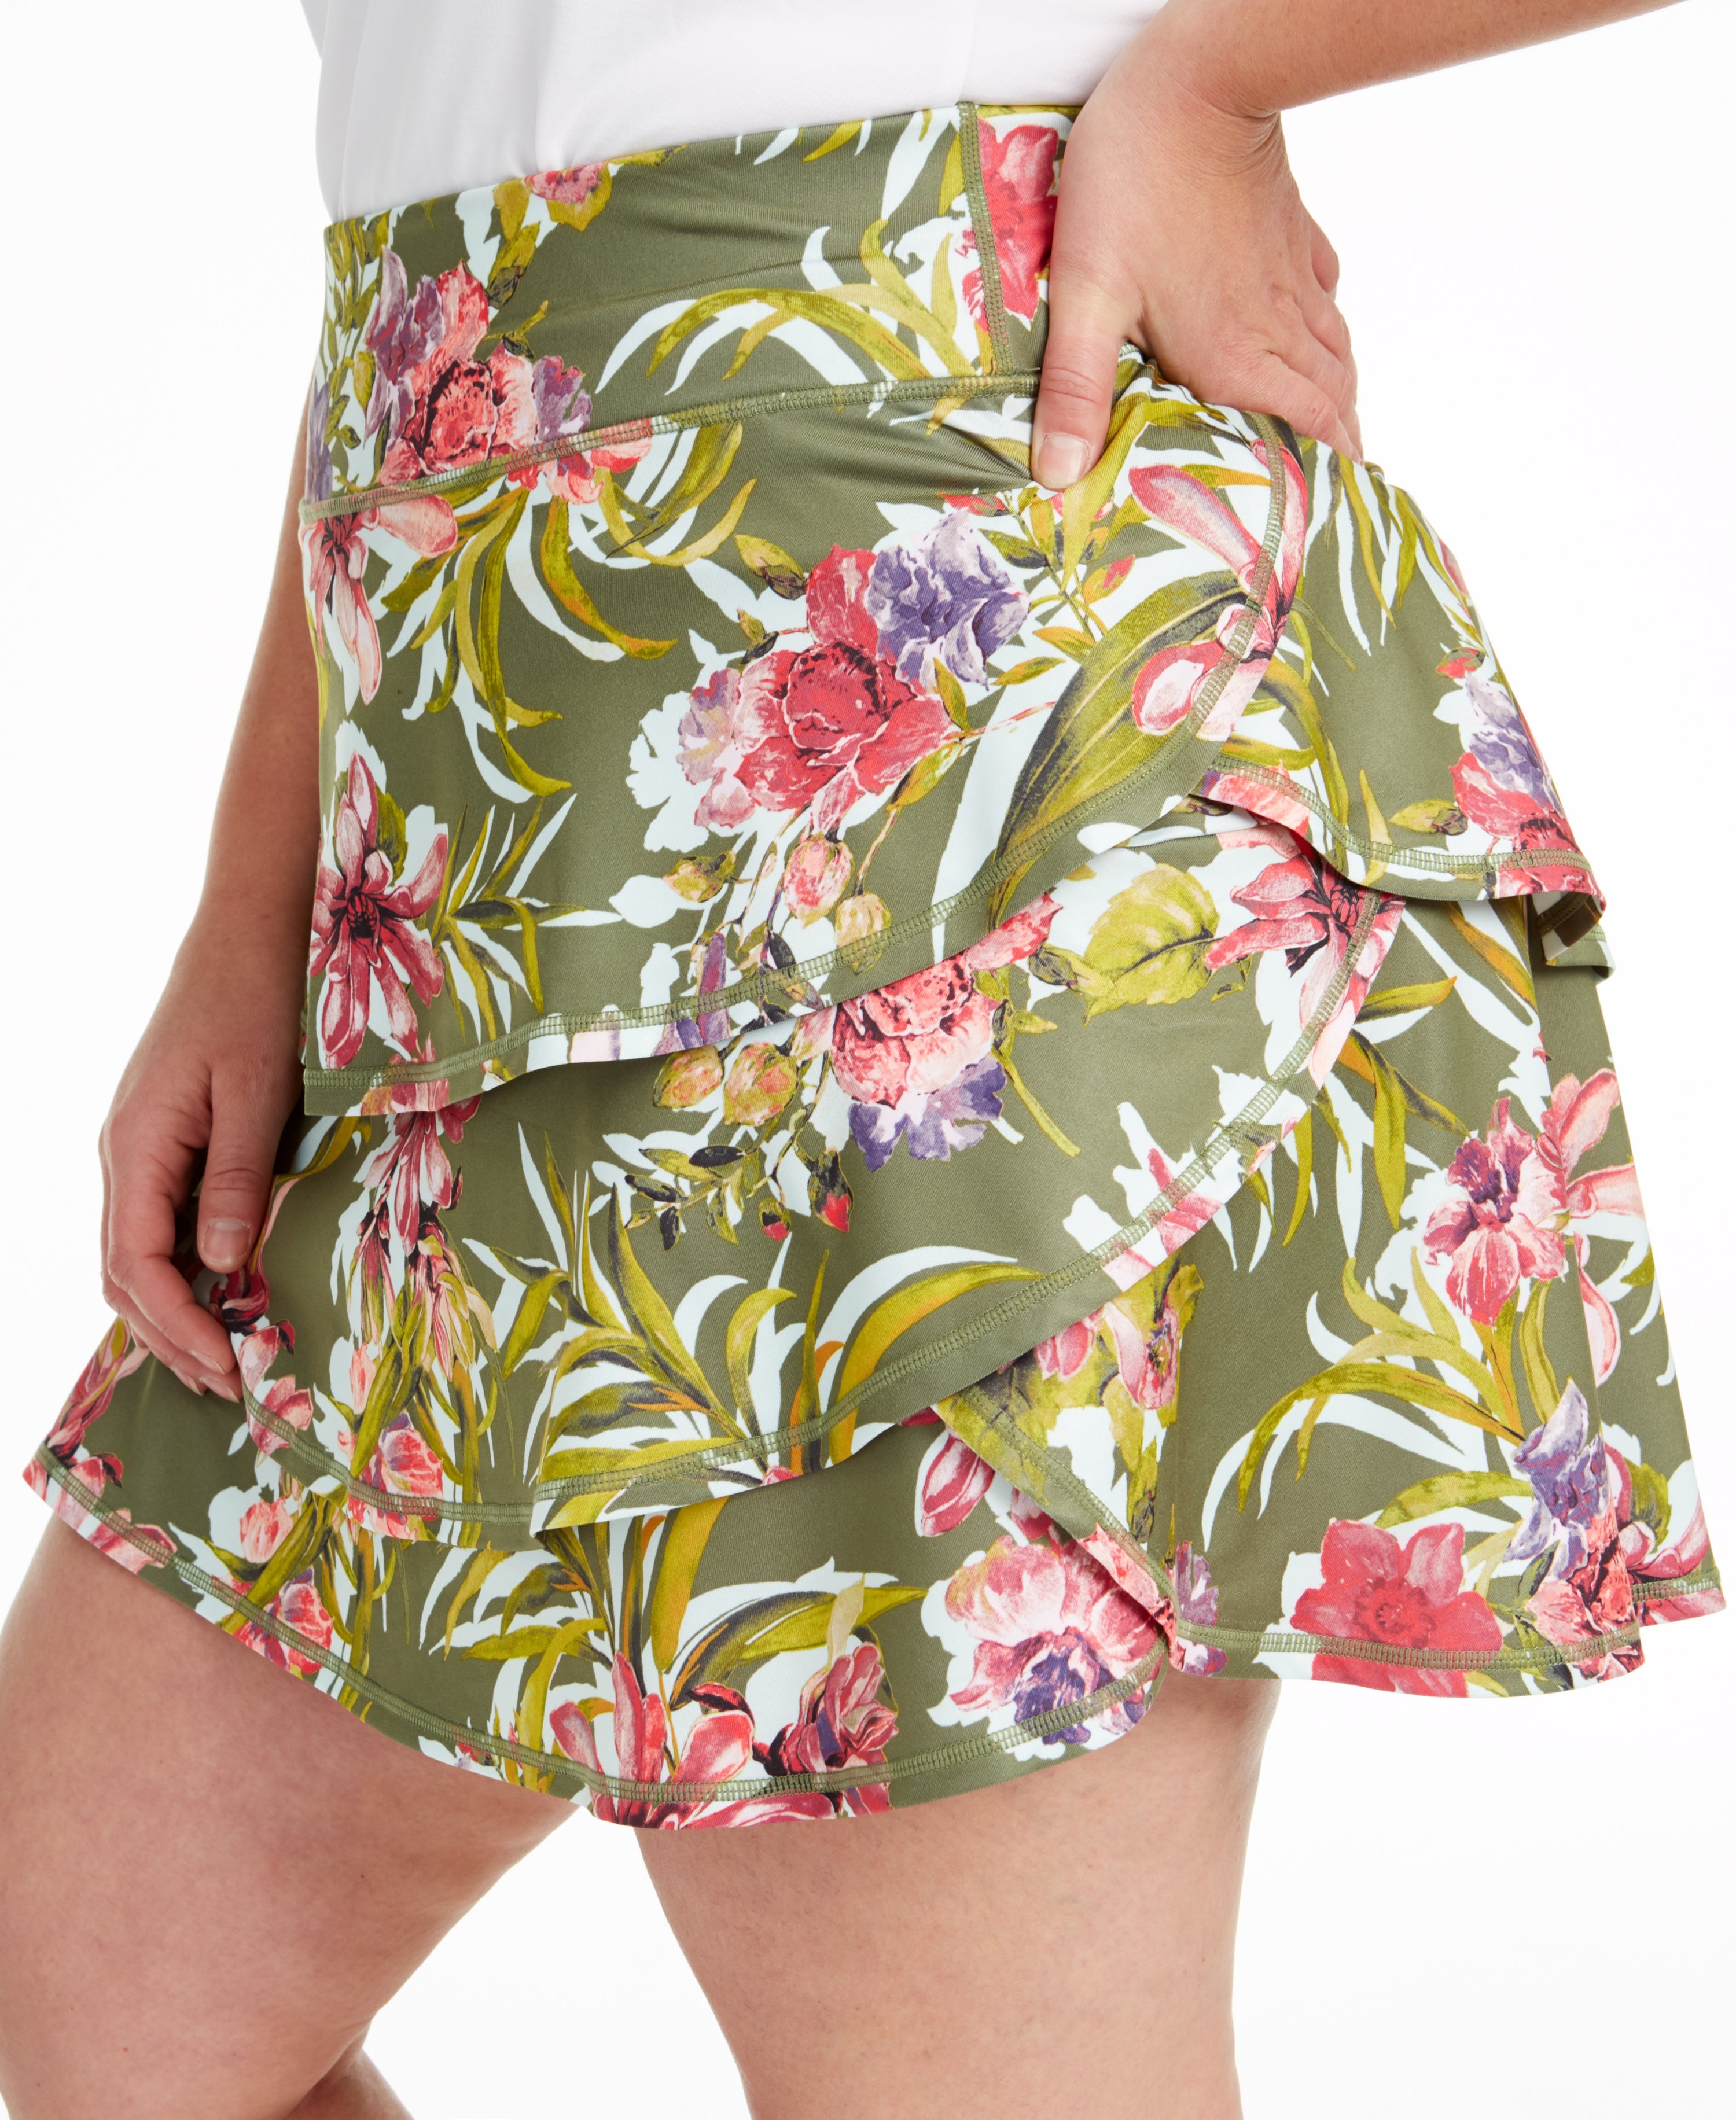 Ideology Womens Plus Size Floral Printed Ruffled Skort Color Dusty Olive